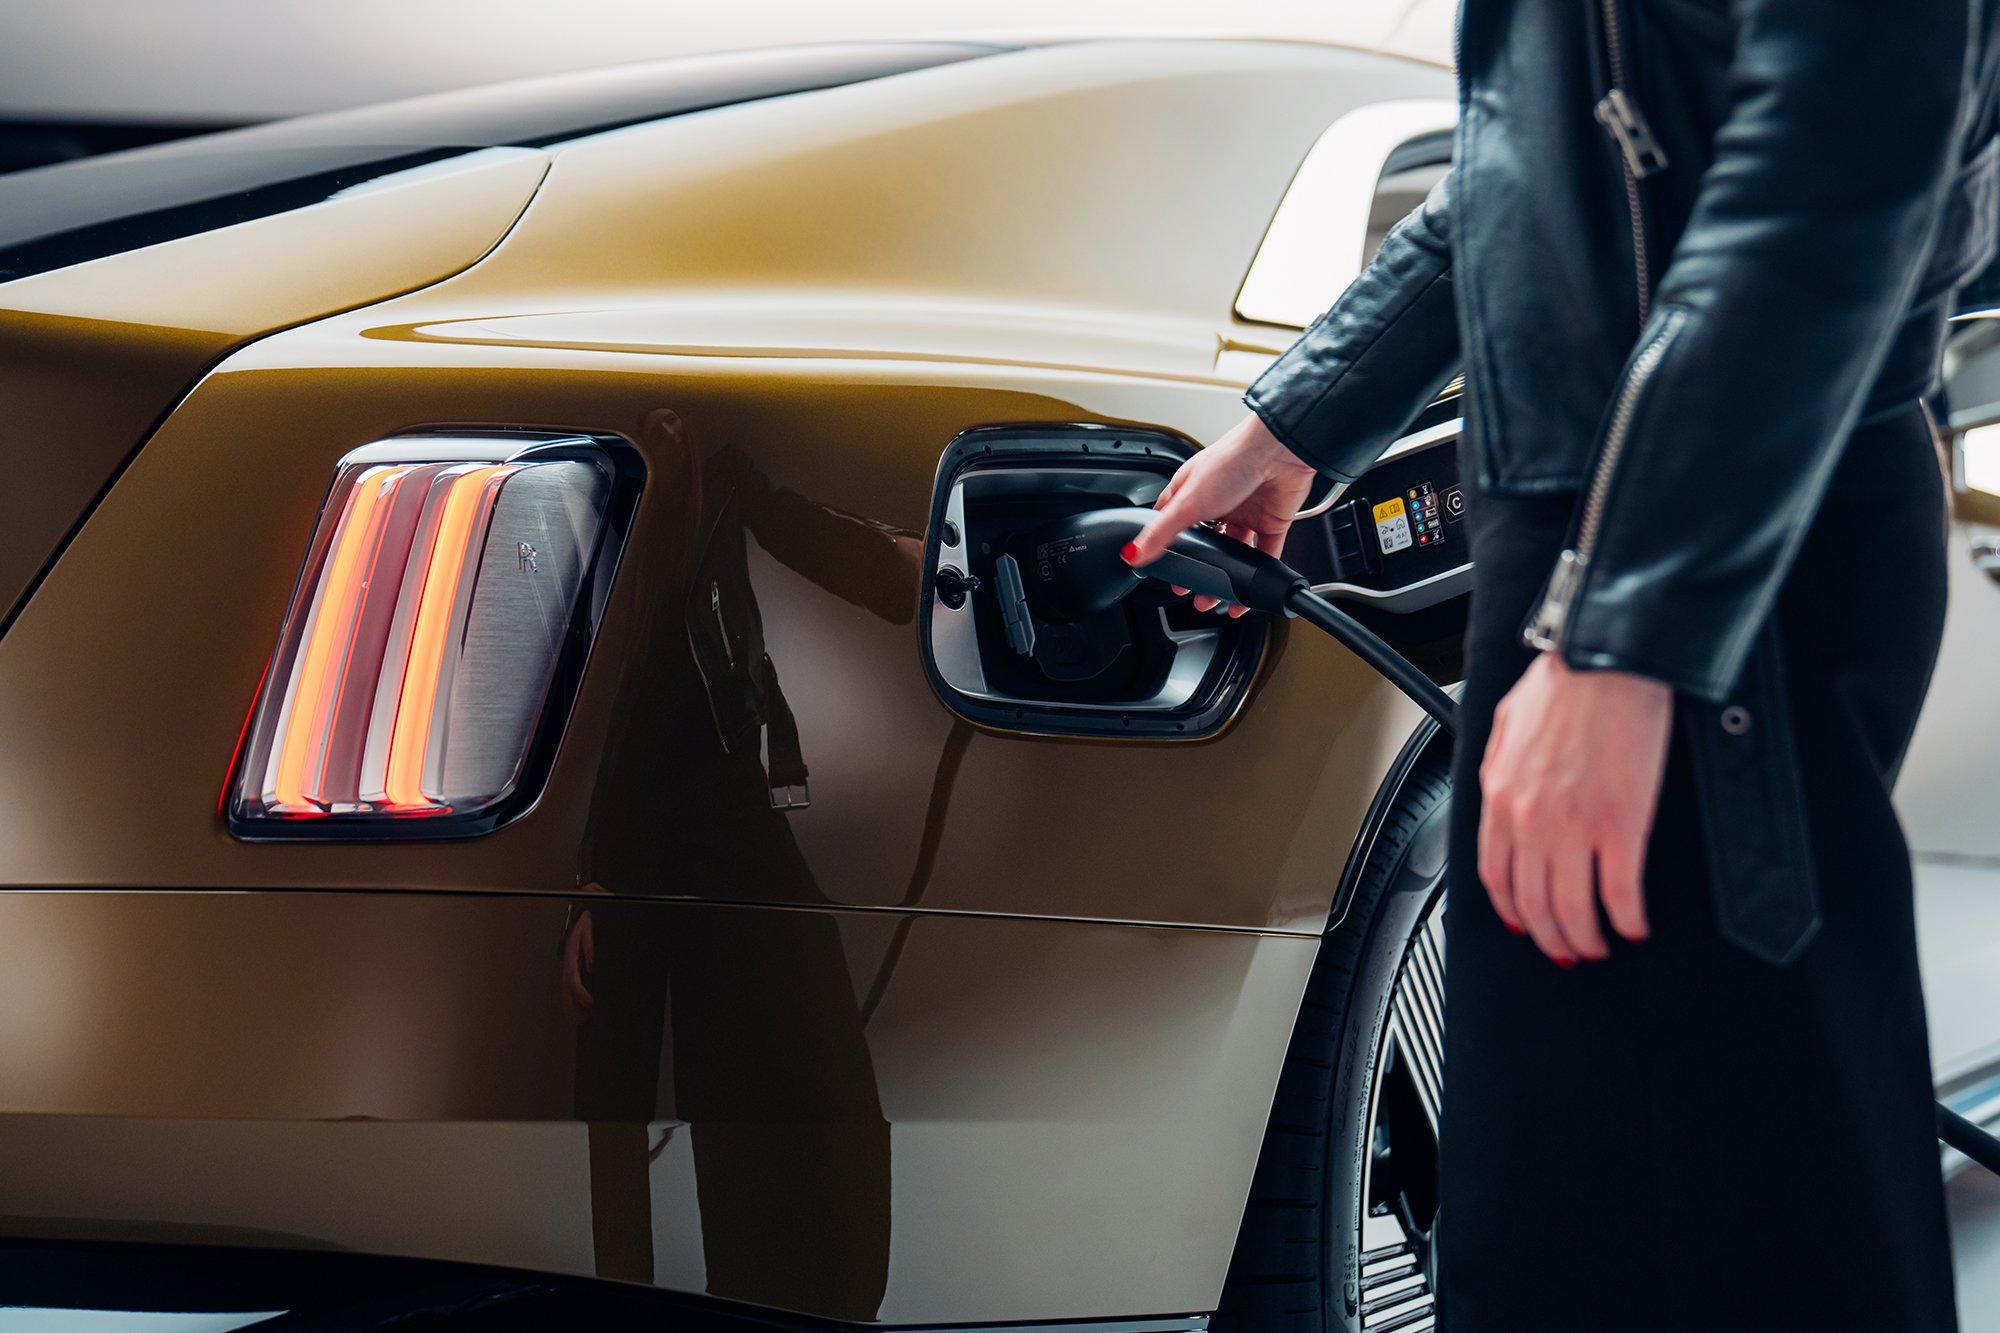 Britta Reineke, founder of ellectric charges the all-electric Rolls-Royce Spectre and shows the rear design